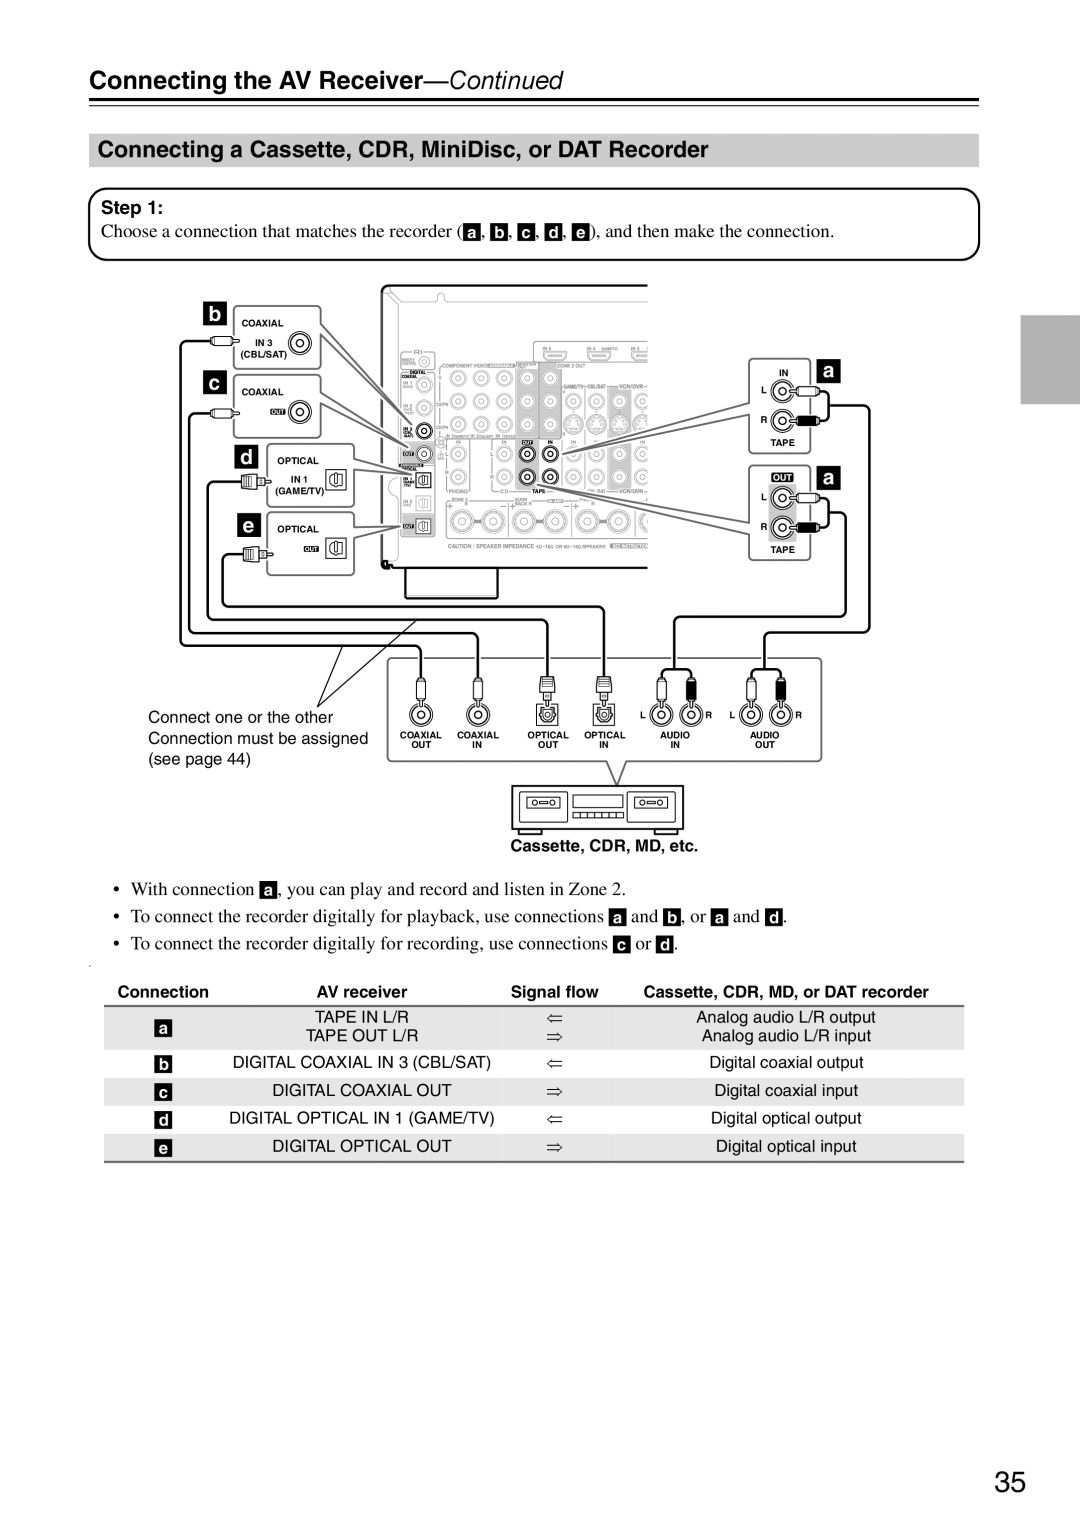 Onkyo DTR-7.9 instruction manual Connecting the AV Receiver—Continued, Cassette, CDR, MD, etc 